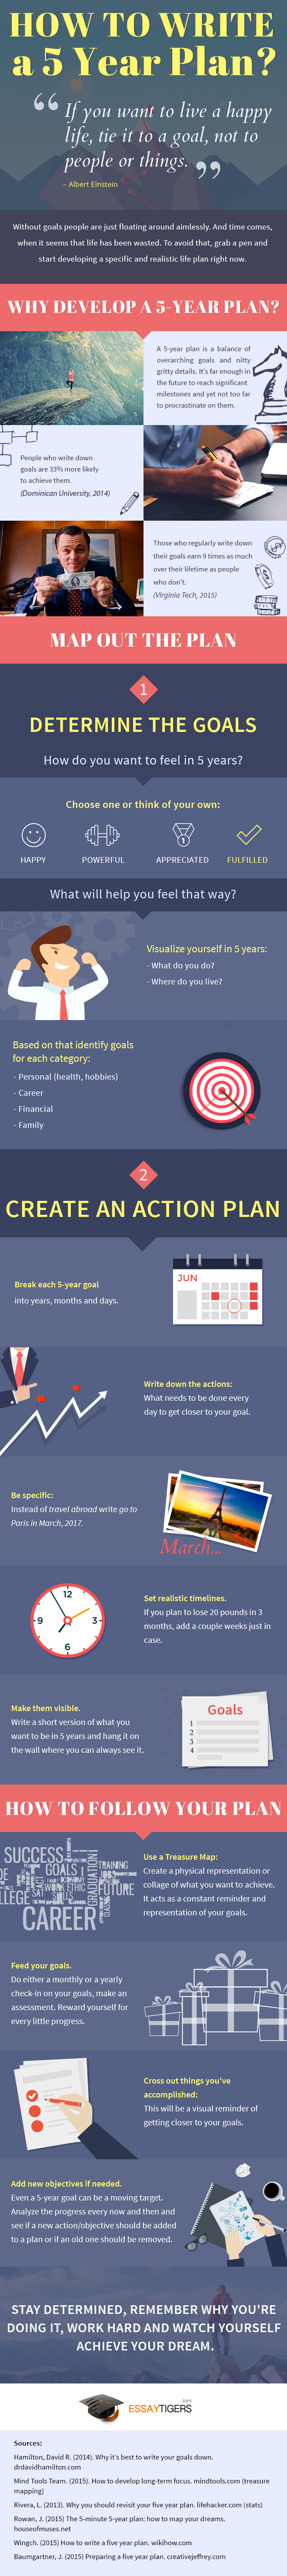 Infographic: How to Write a 5 Year Plan to Achieve Your Goals